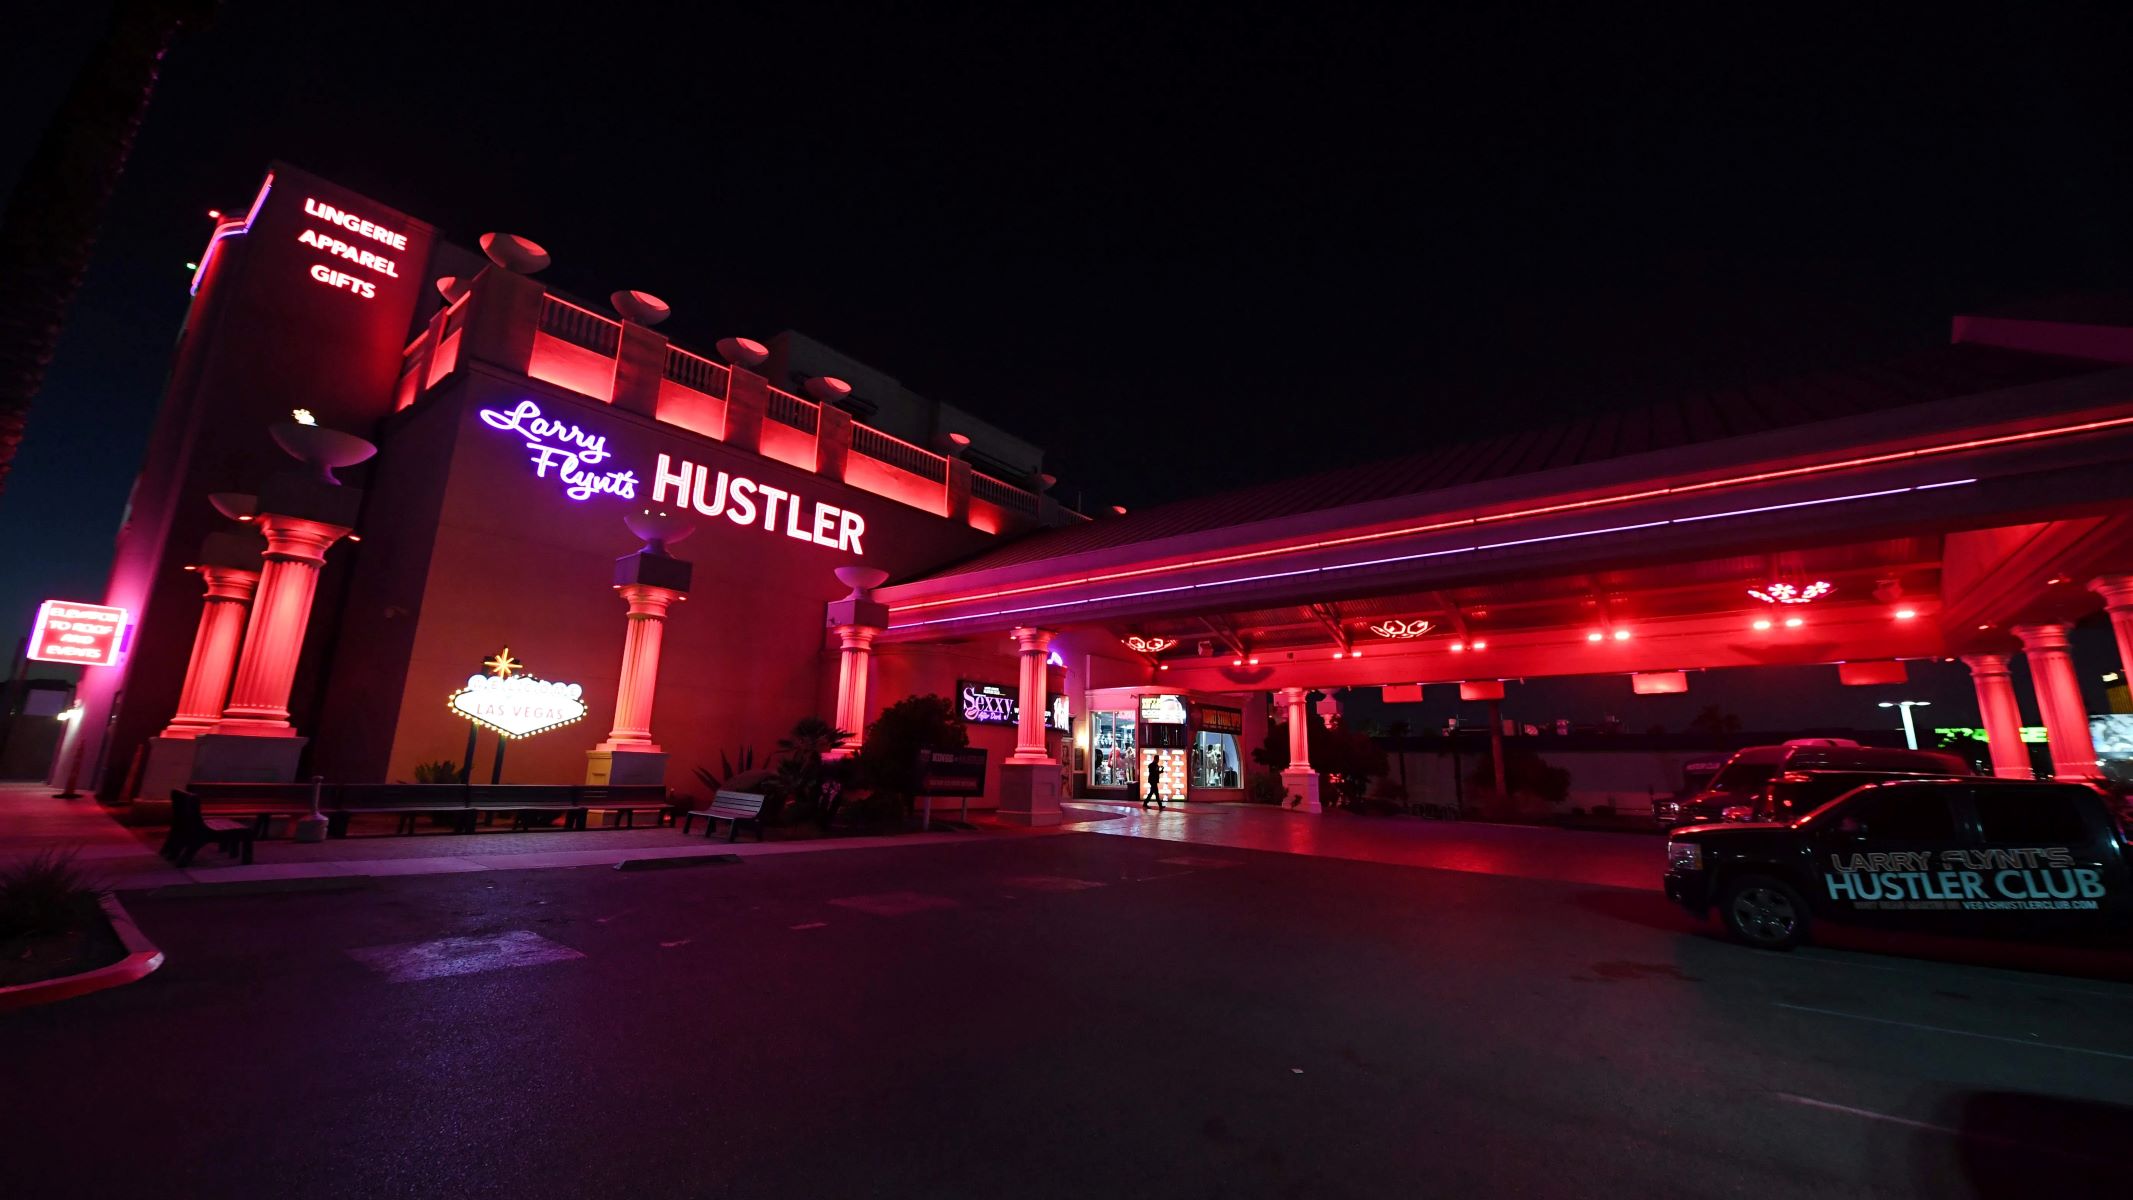 Larry Flynt’s Hustler Club Offers Free Lap Dances For MGM Guests Affected By Cyberattack